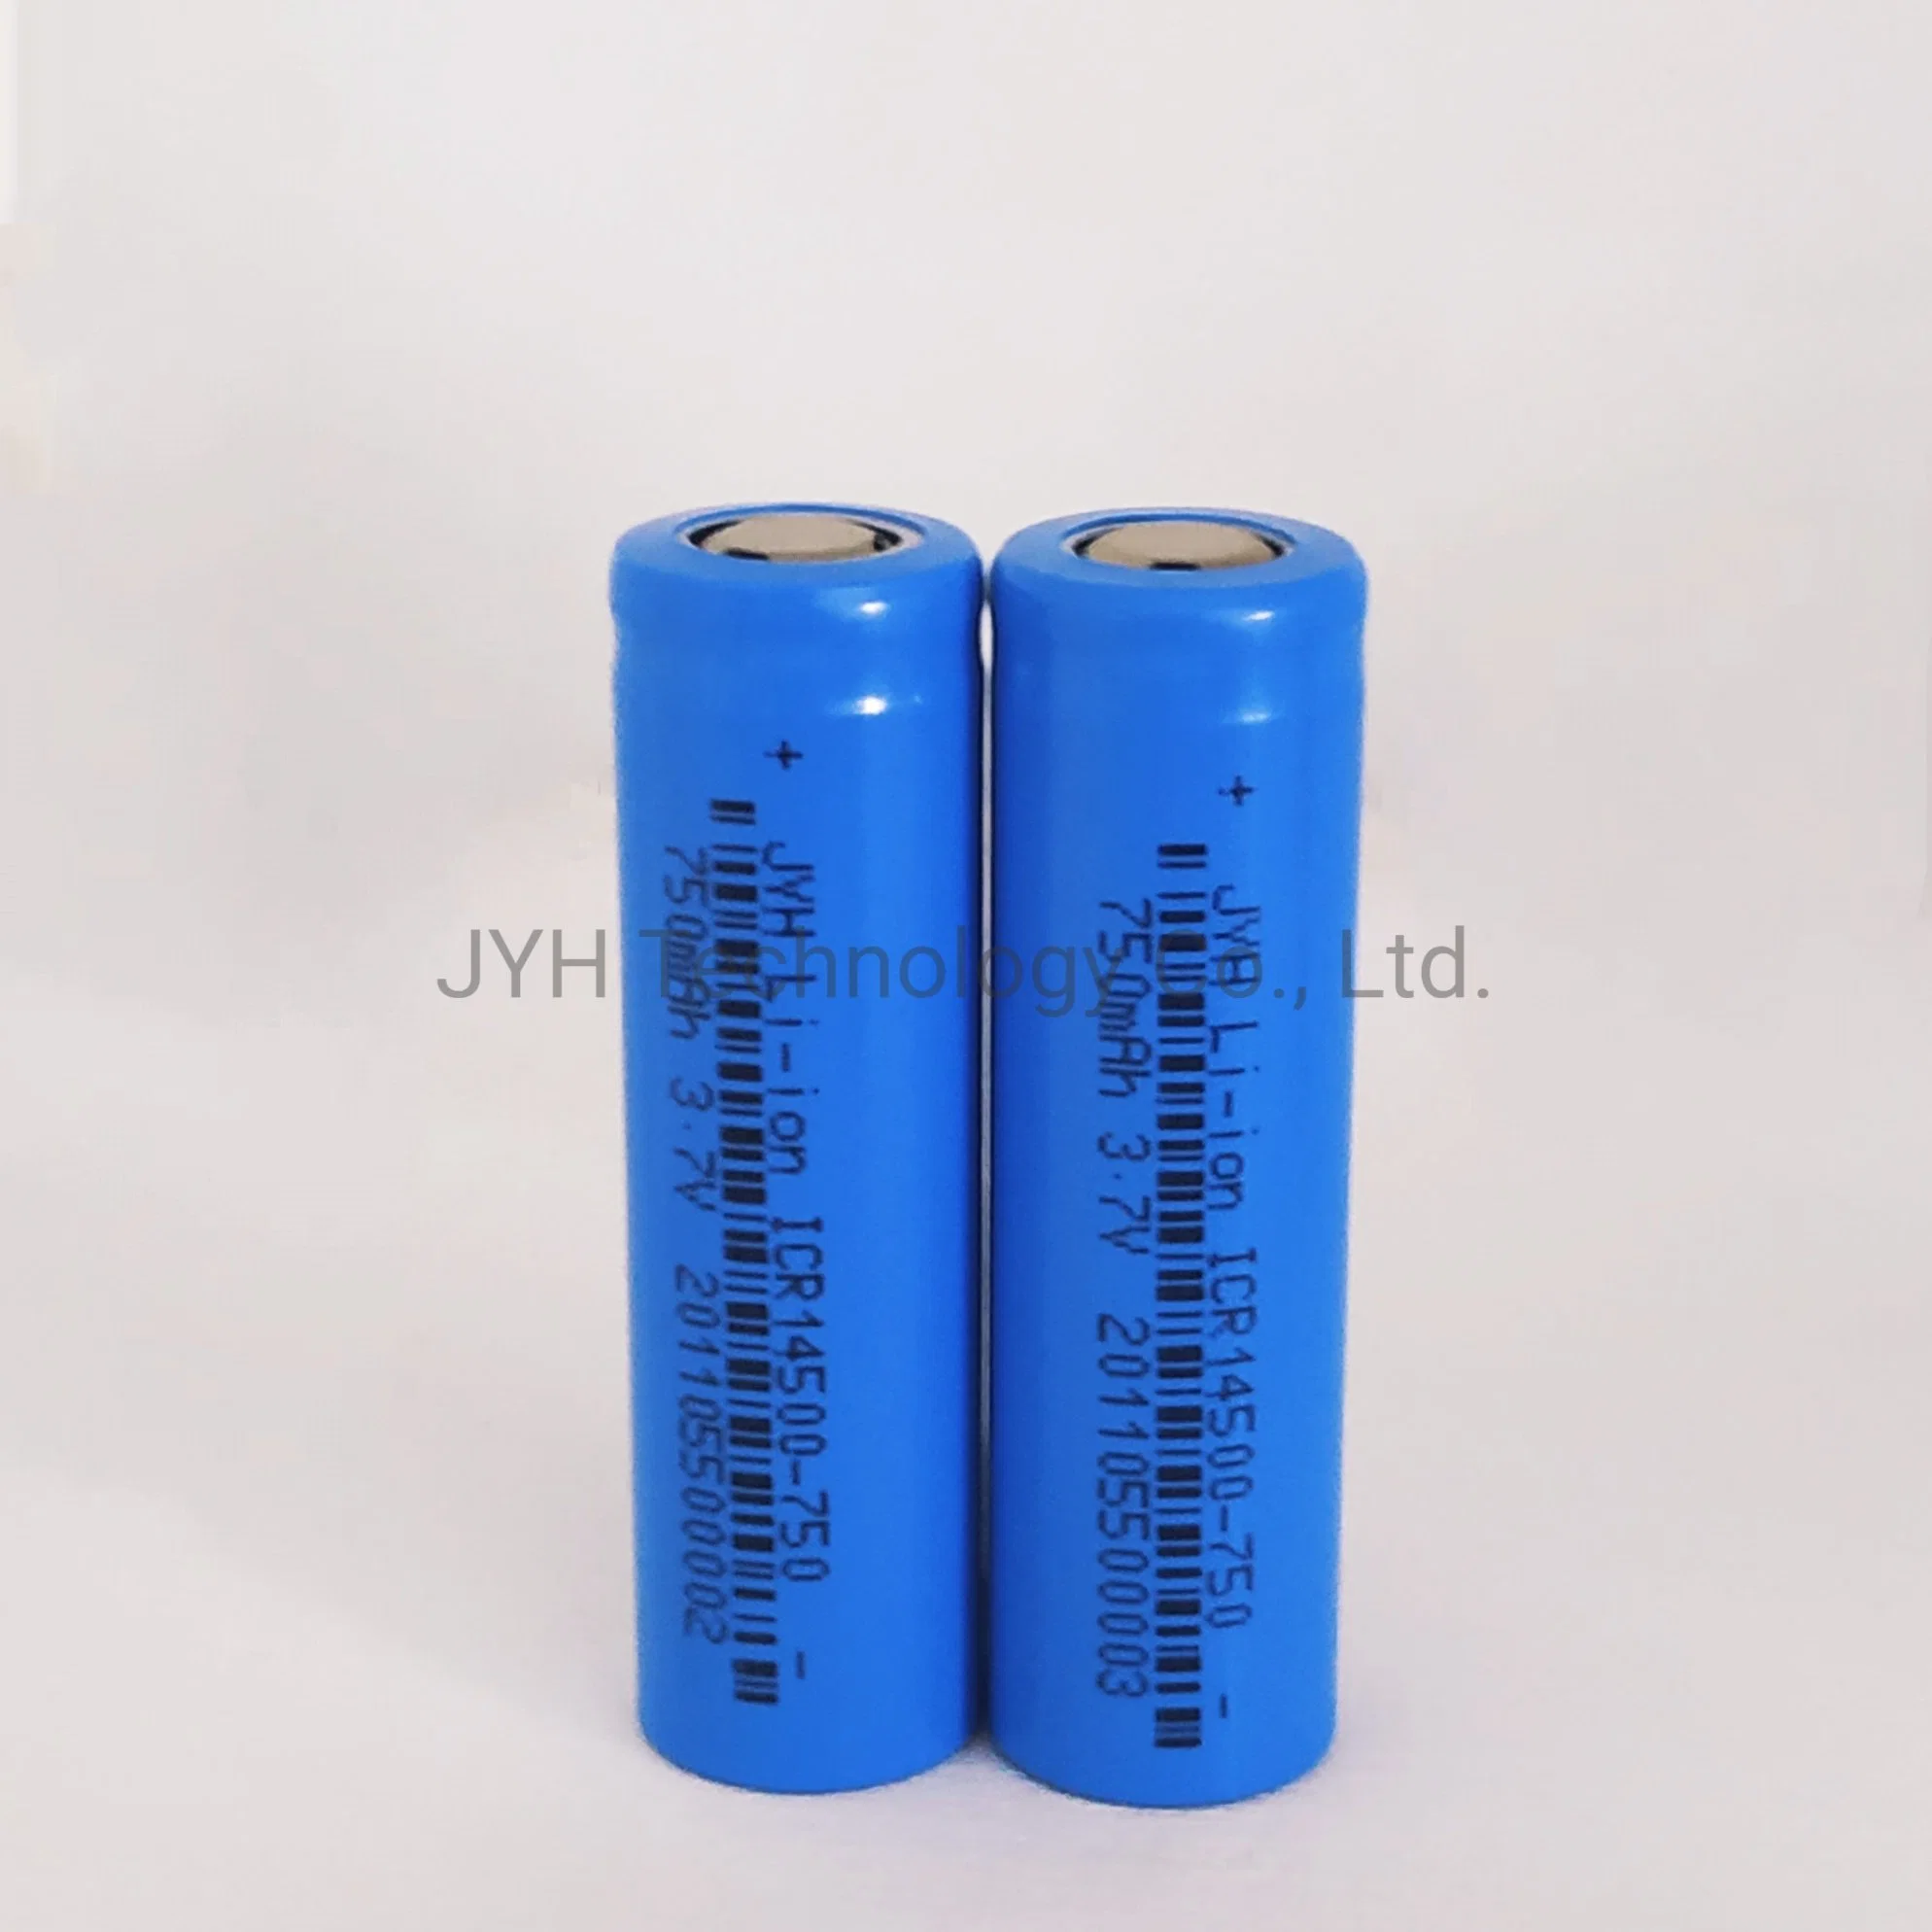 Icr14500-750 3.7V 750mAh Rechargeable Li-ion 1s1p Battery Pack with Lead Strip